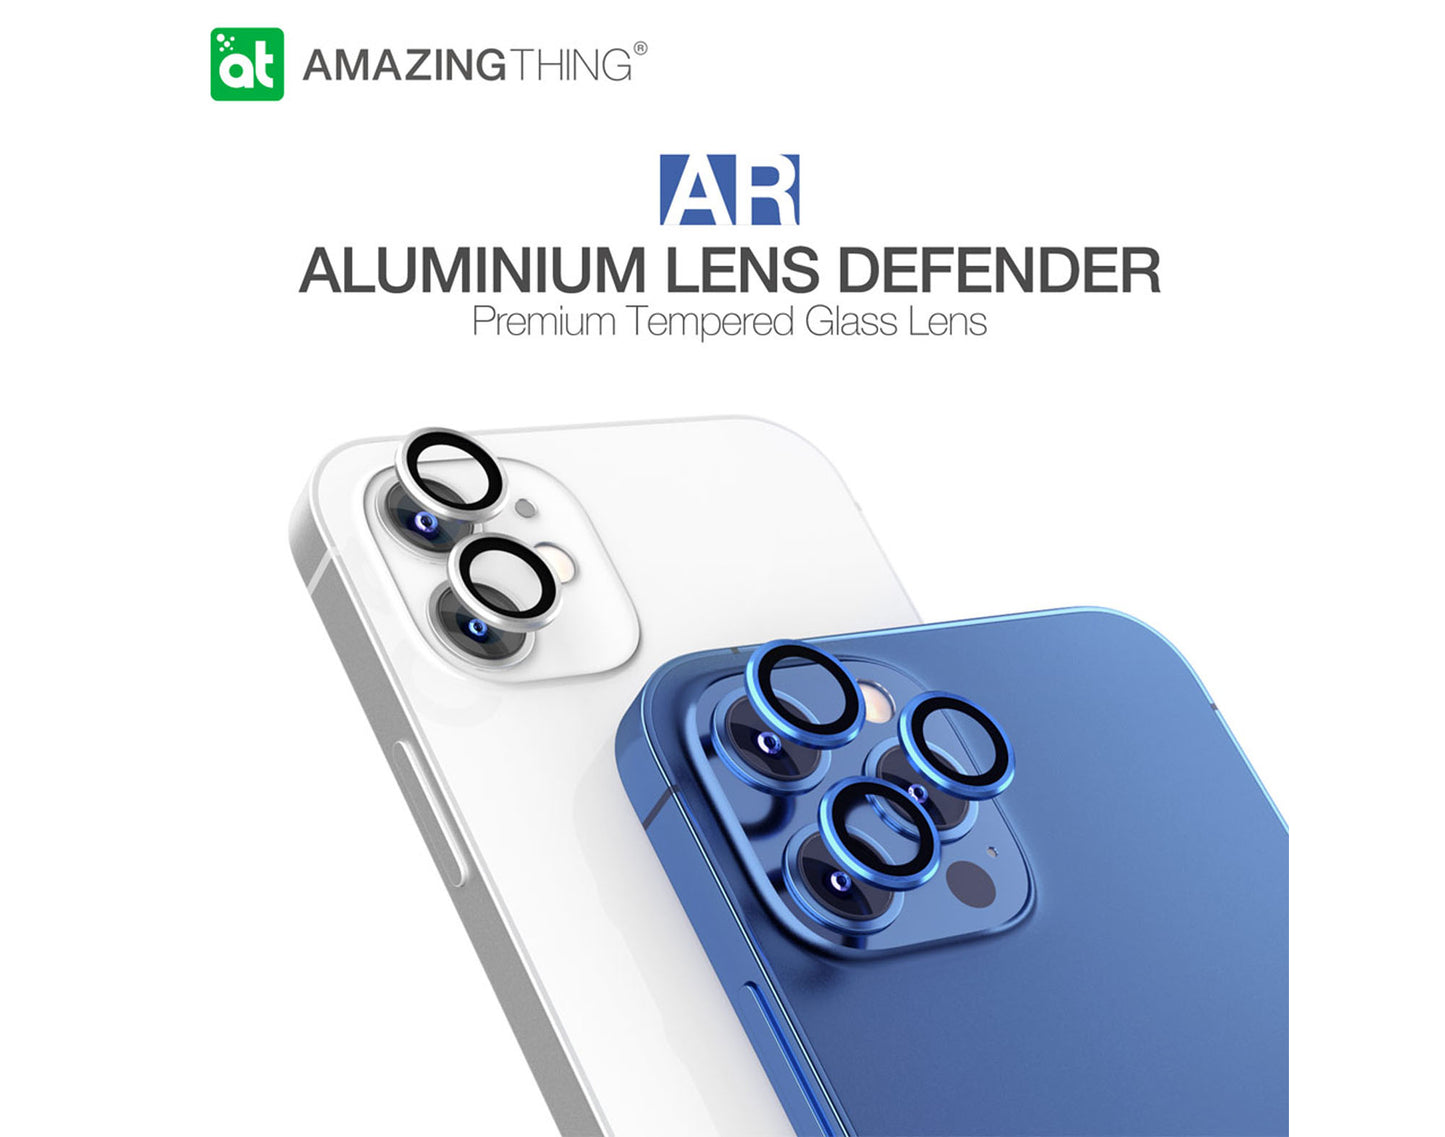 AmazingThing SUPREME AR 3D Lens Protector for iPhone 12 Pro - 3 pcs - Grey (Barcode: 4892878062916 )